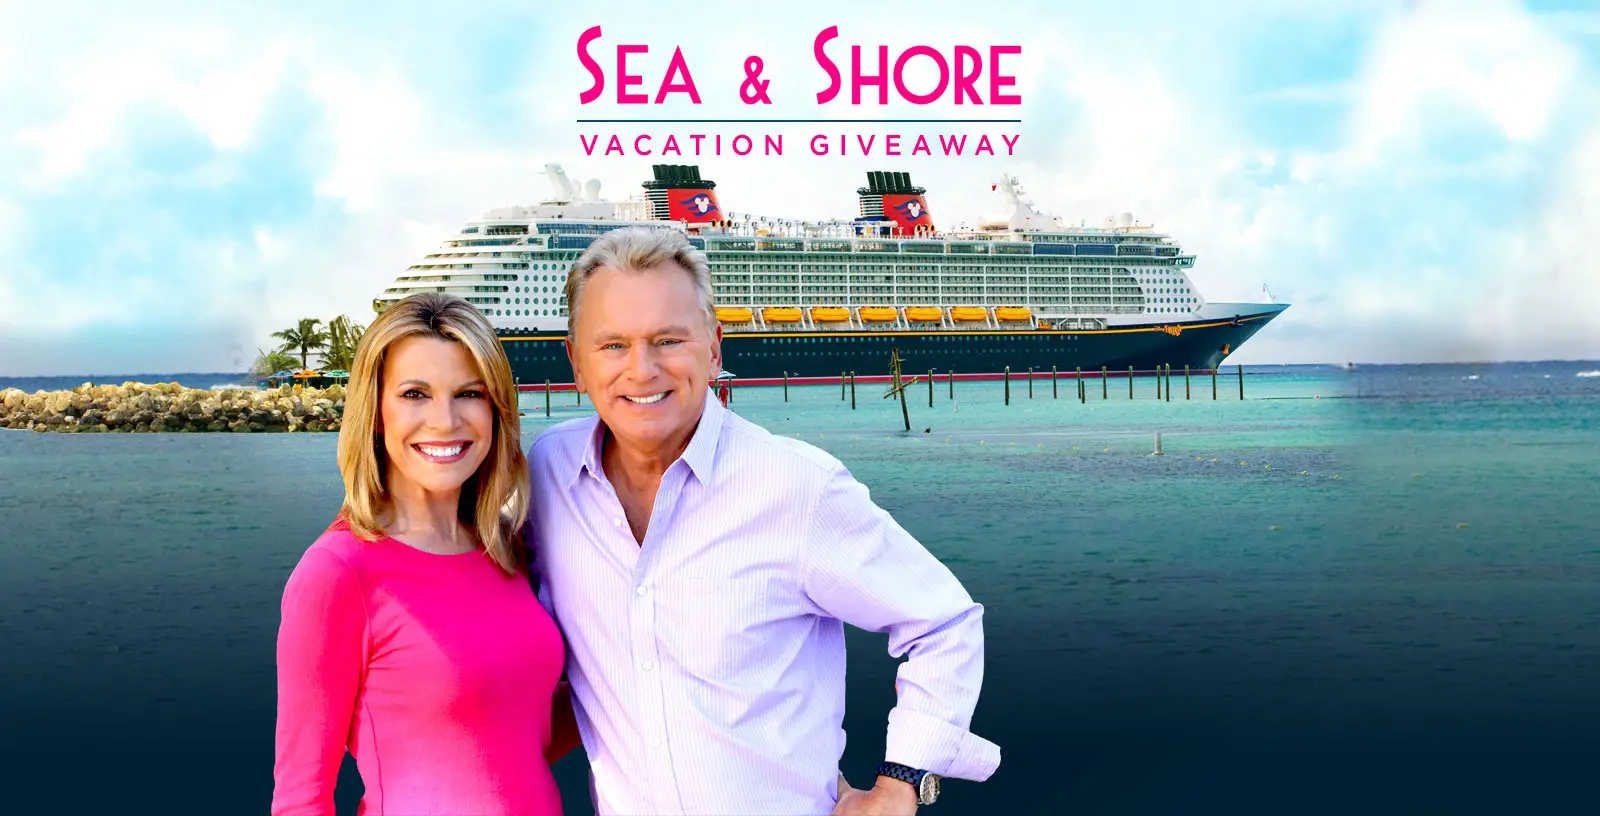 Sweeties Sweeps has the Wheel of Fortune Sea & Shore Vacation Giveaway Daily Puzzle Answers. Get the answer and enter to win a trip to the Bahamas.